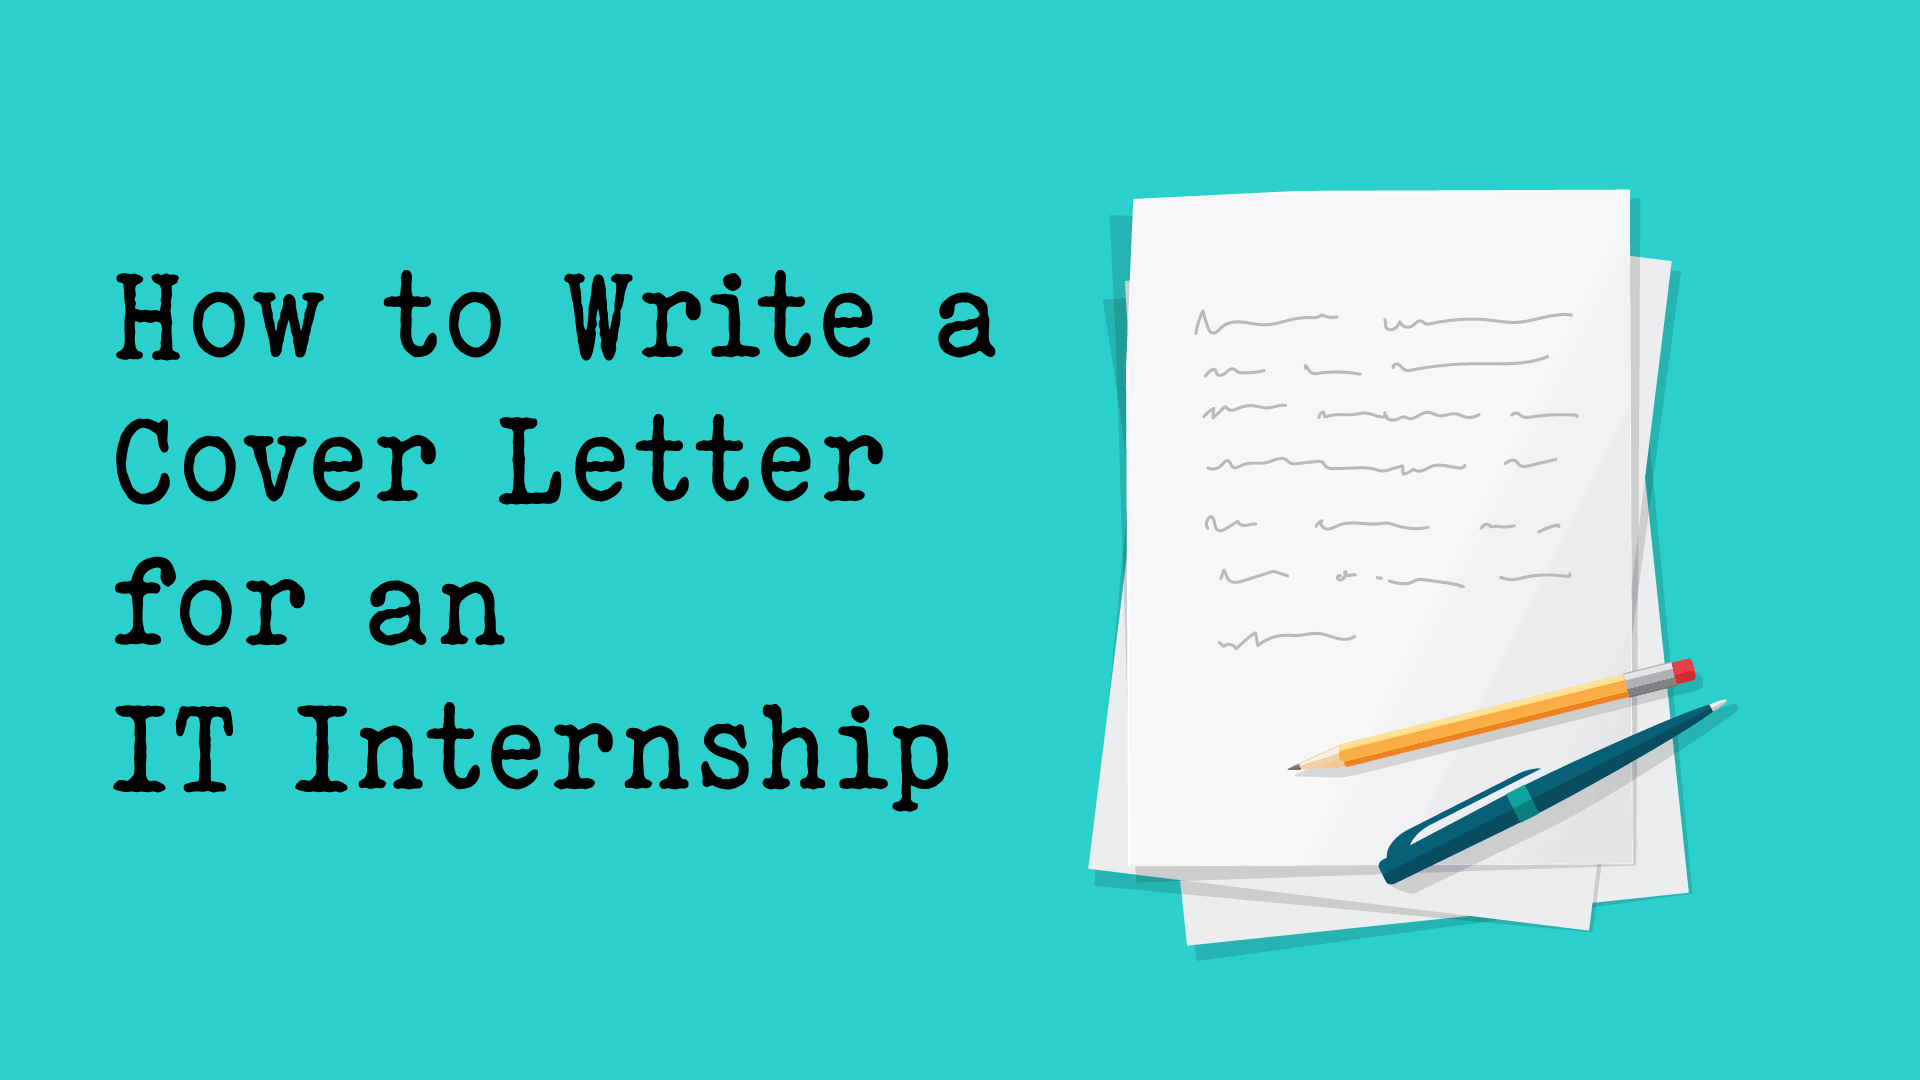 How to Write a Cover Letter for an IT Internship